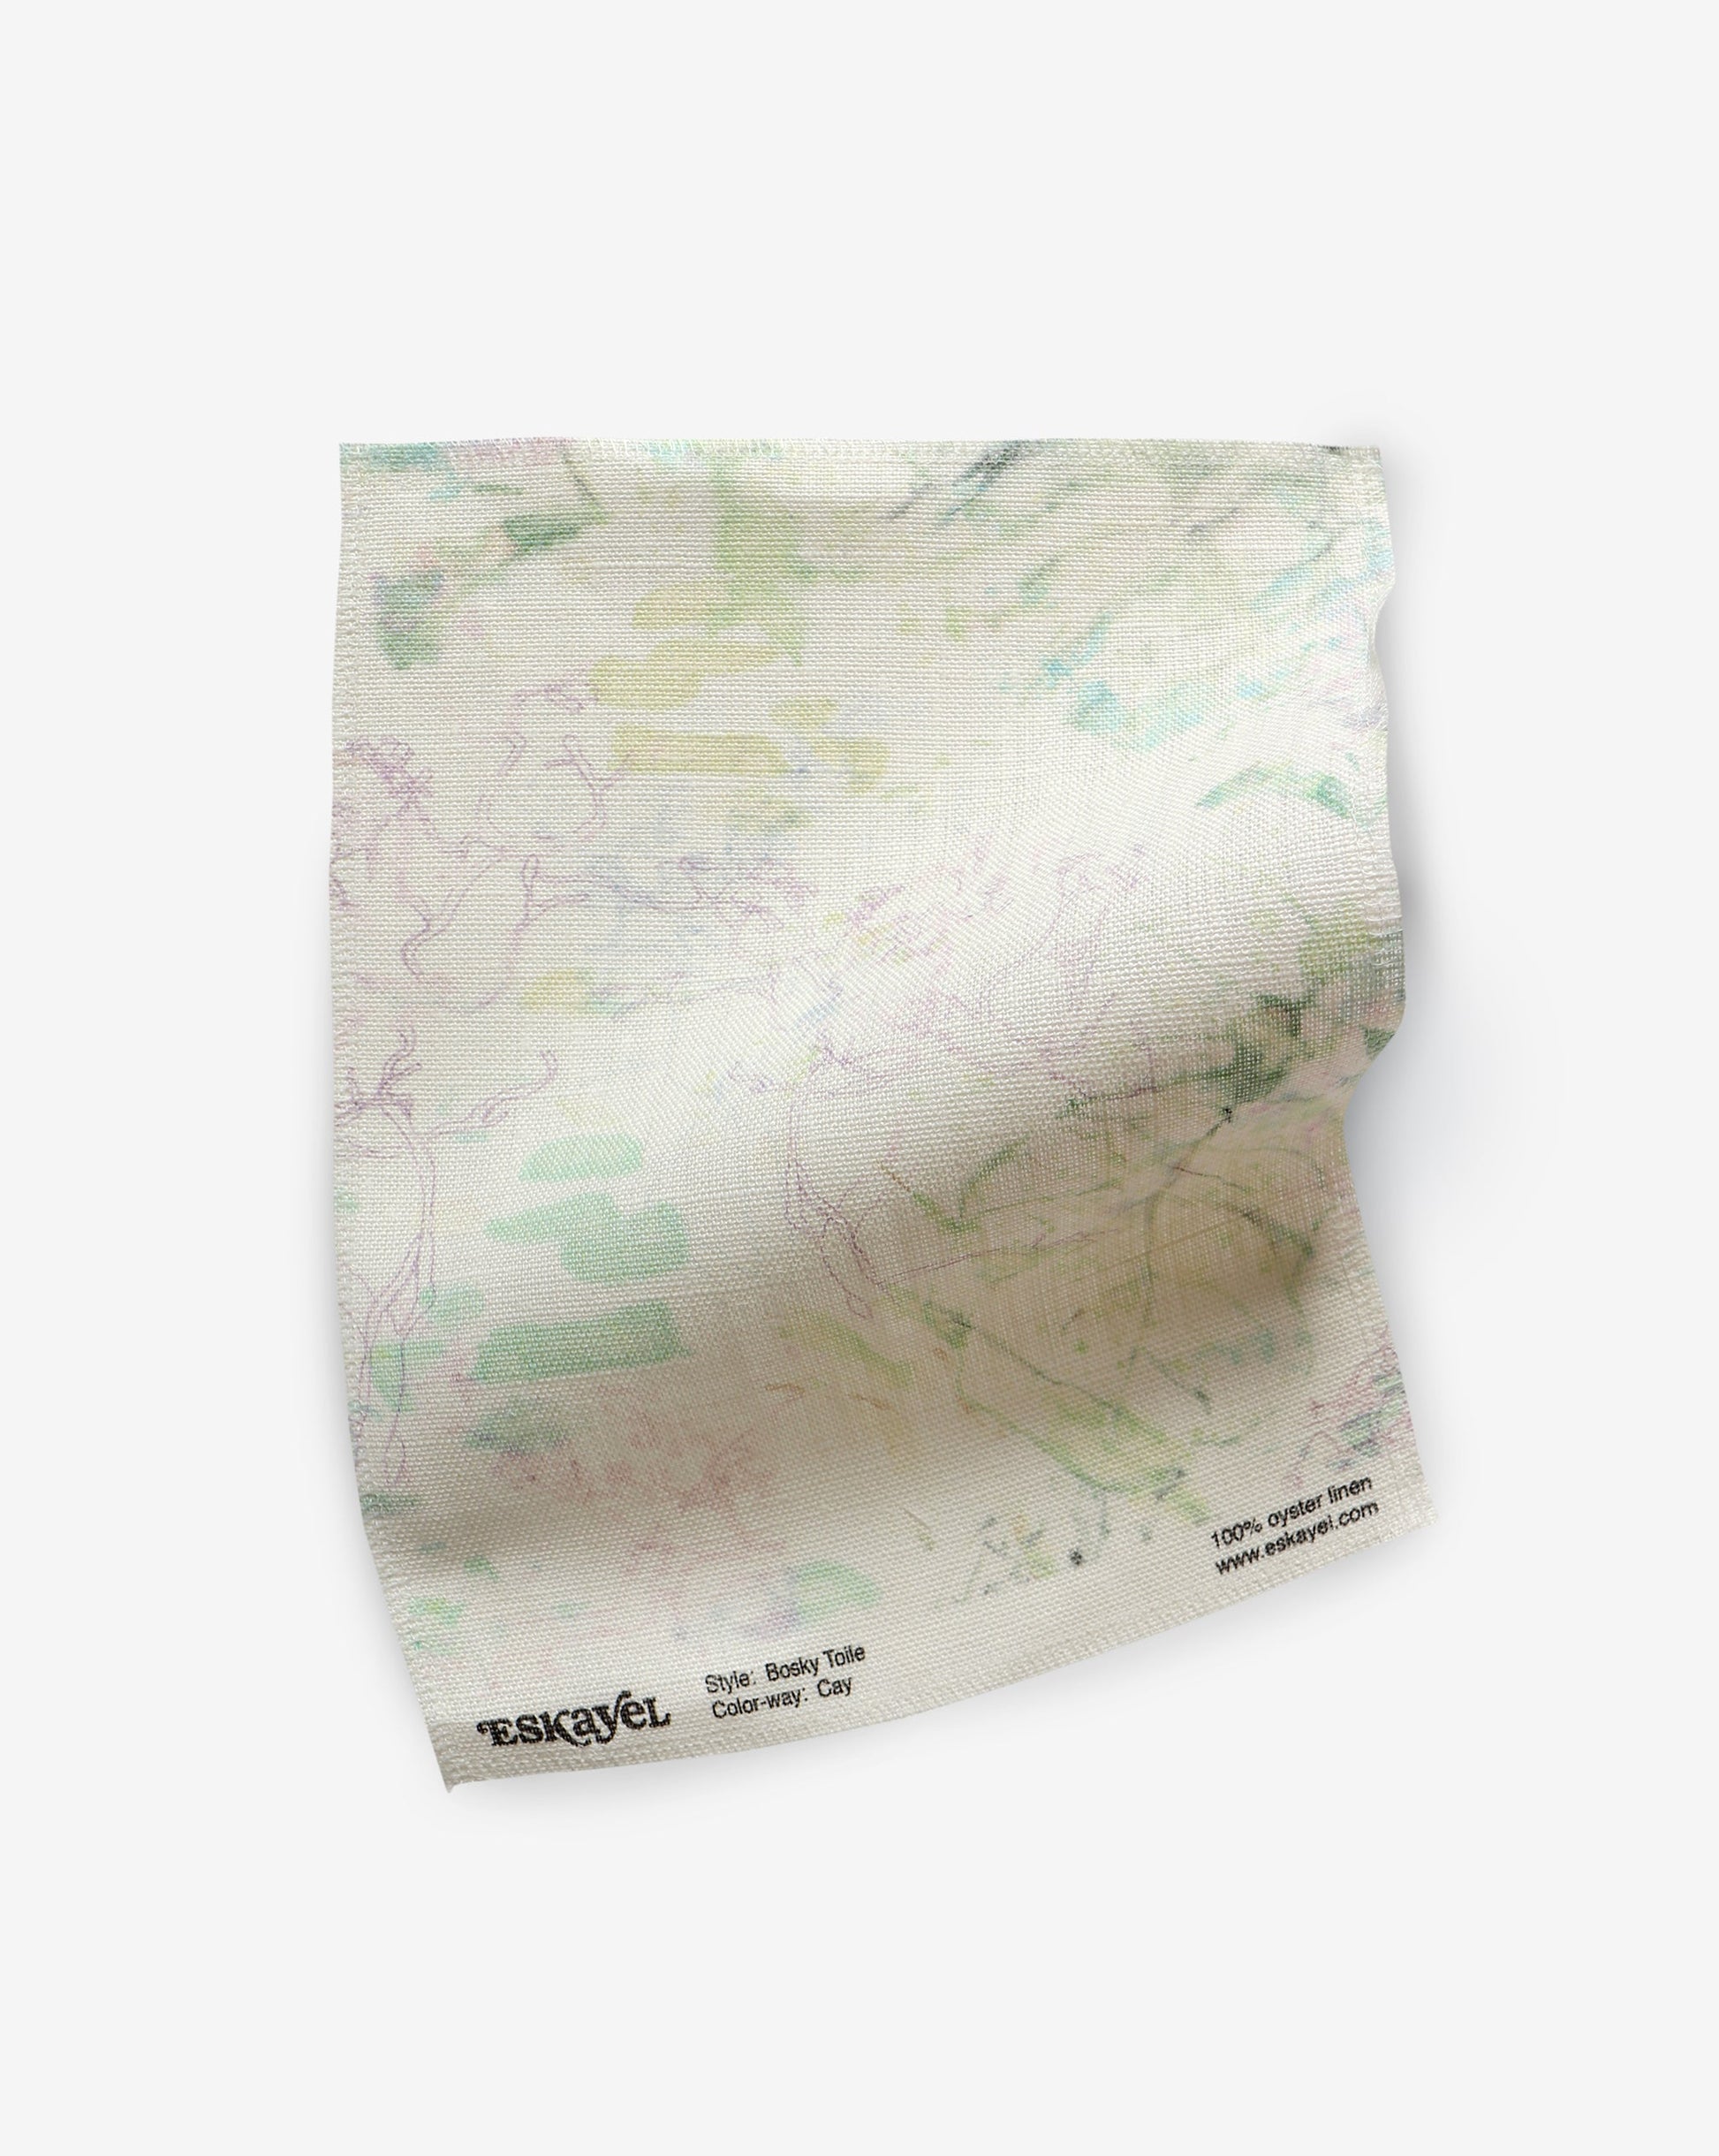 A Bosky Toile Fabric Cay is a high-end wallpaper with a map on it